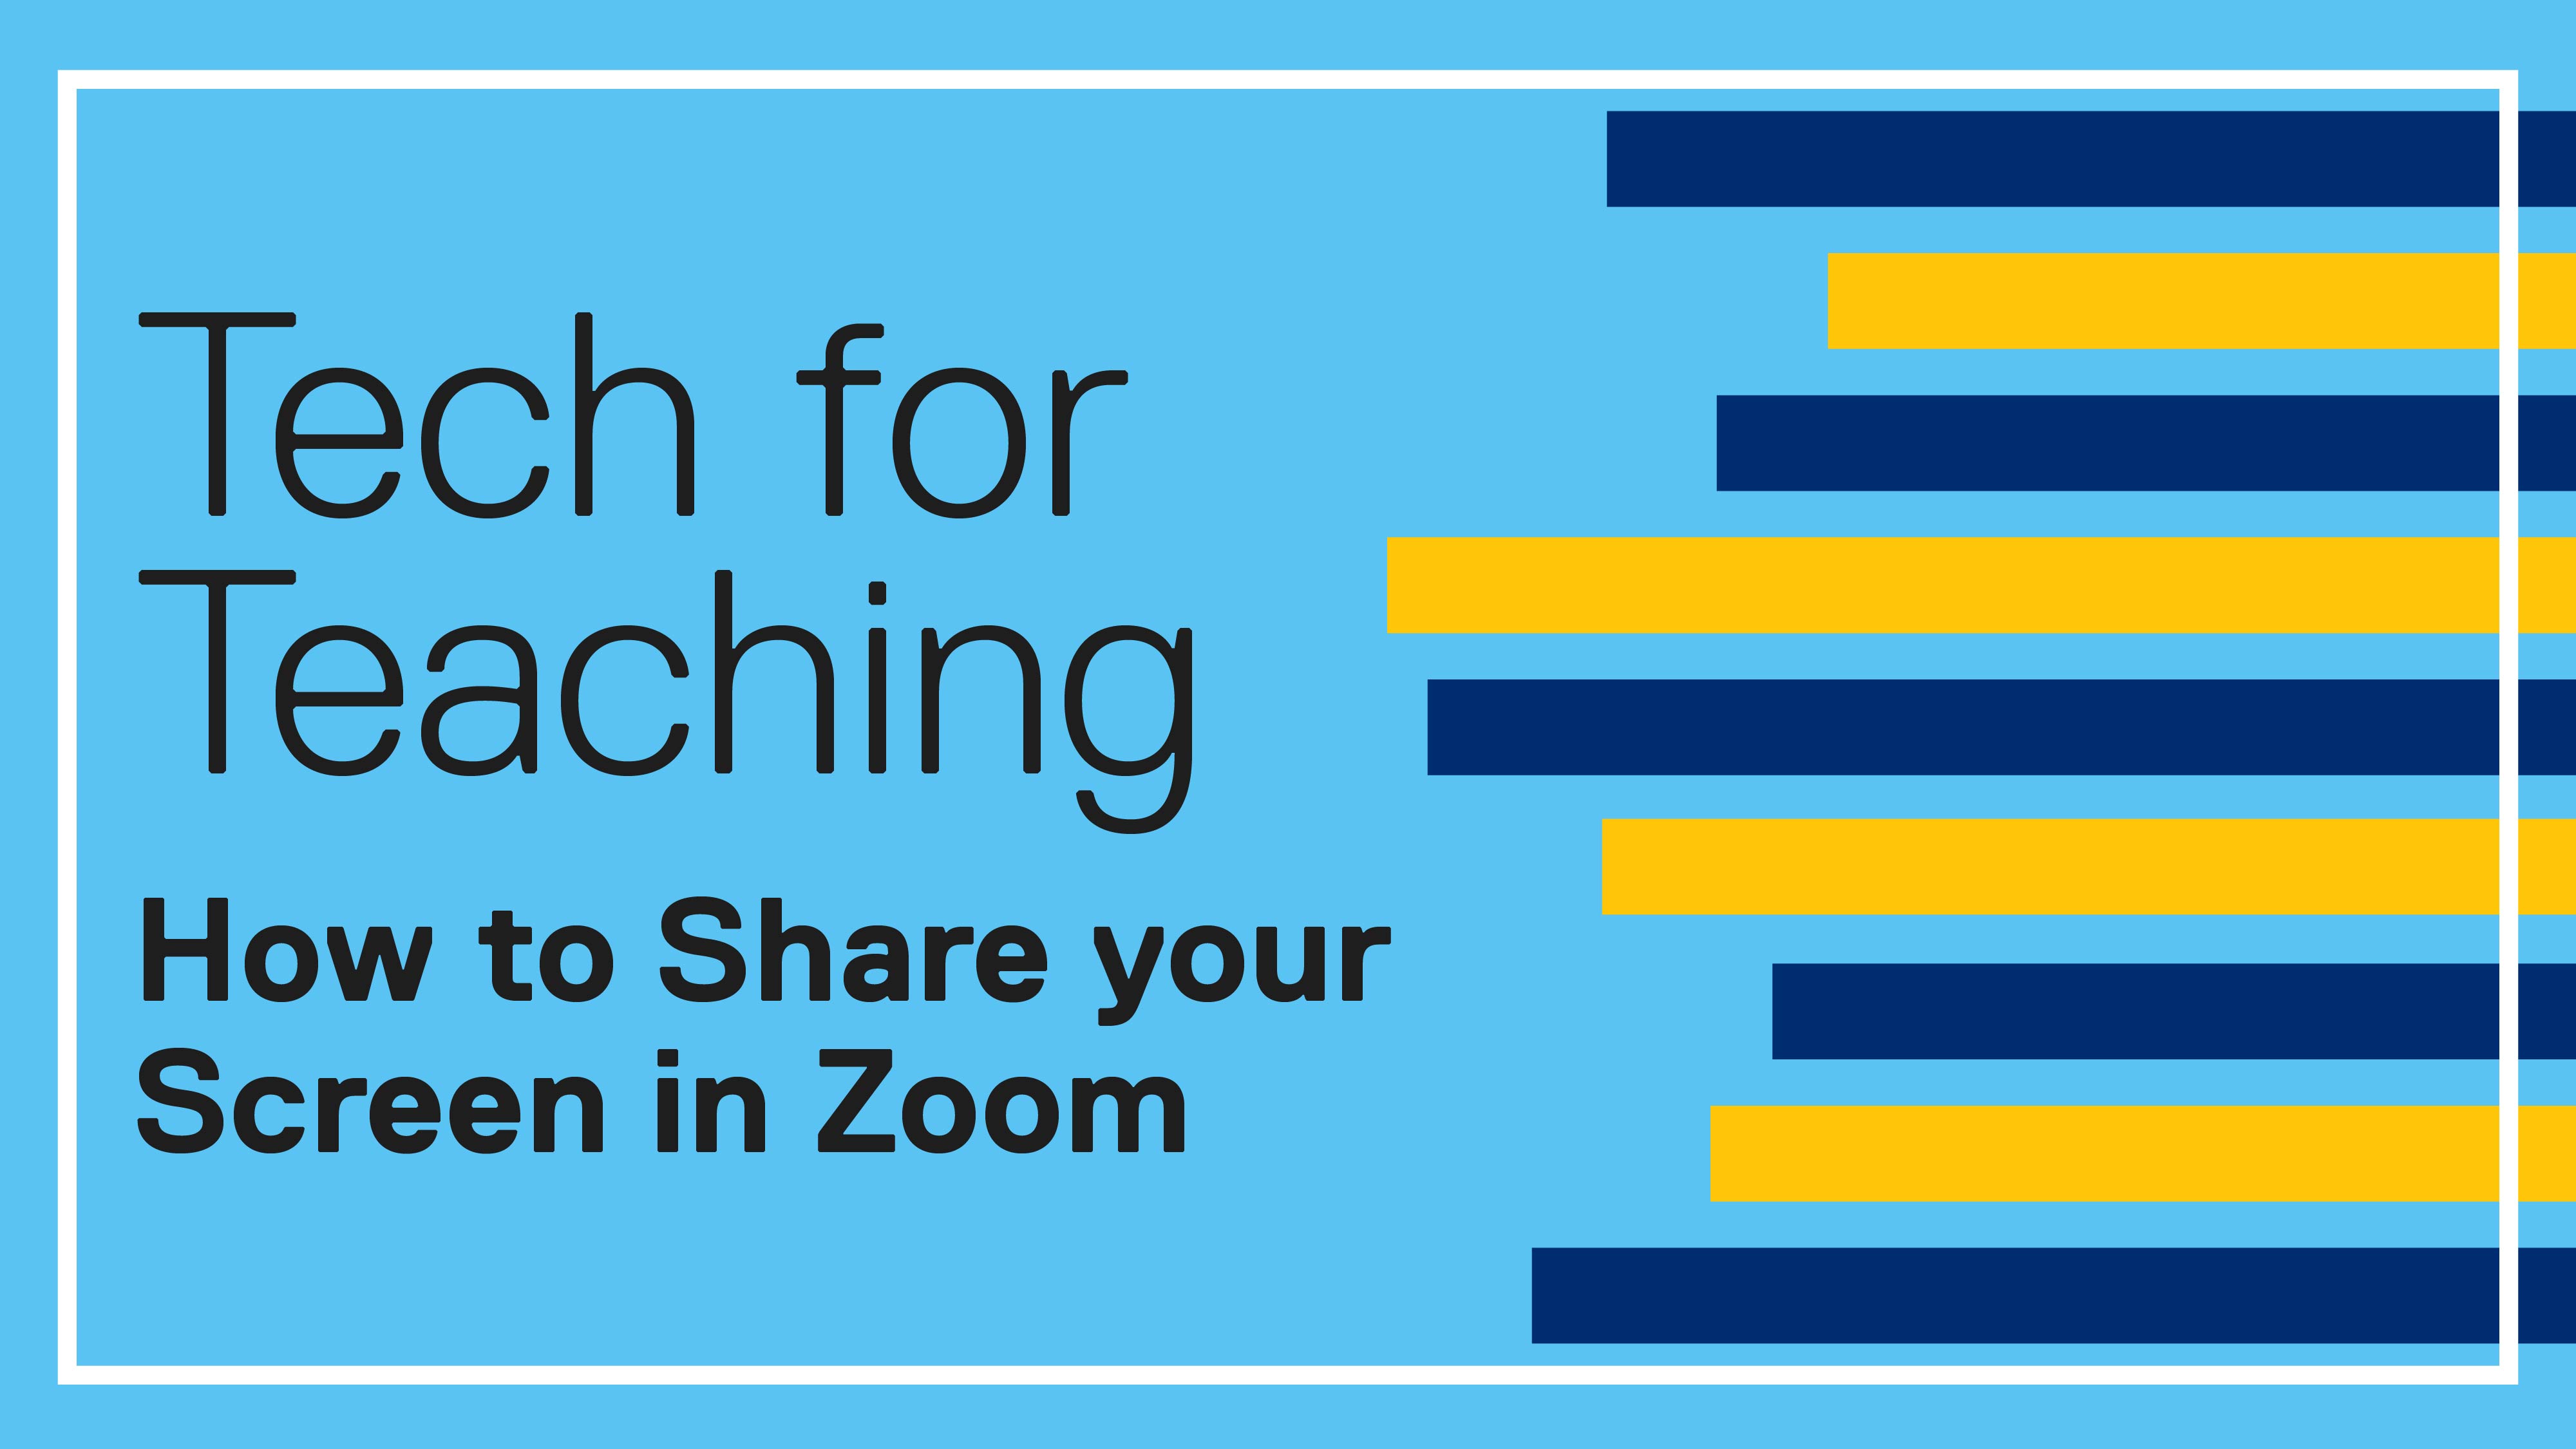 Tech for Teaching: How to Share Your Screen in Zoom